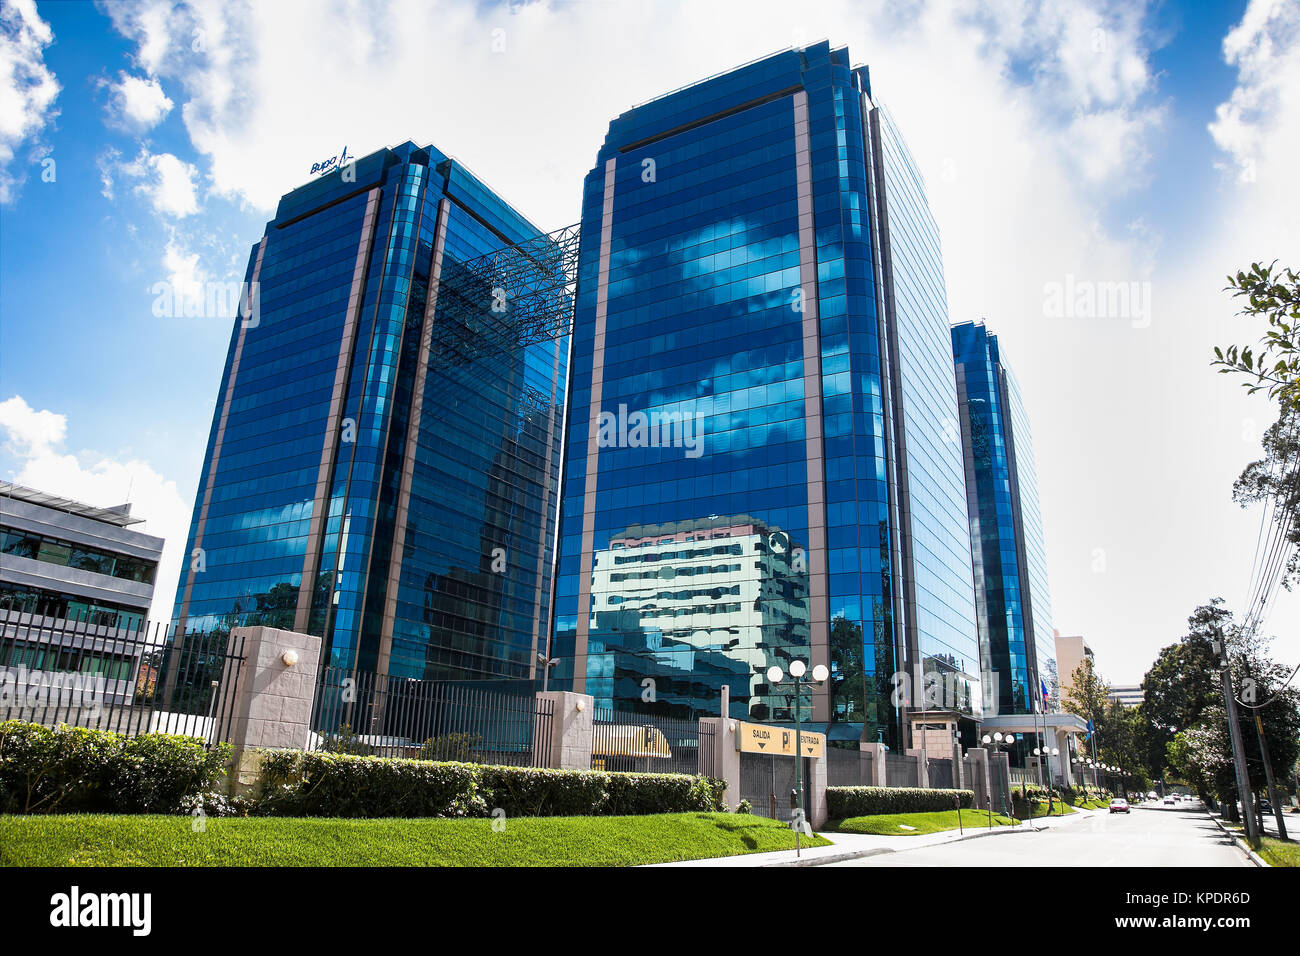 GUATEMALA CITY, GUATEMALA-DEC 25, 2015: Government Buildings & Views Of The Capital Ahead Of National elections at The Euro Plaza business center on D Stock Photo